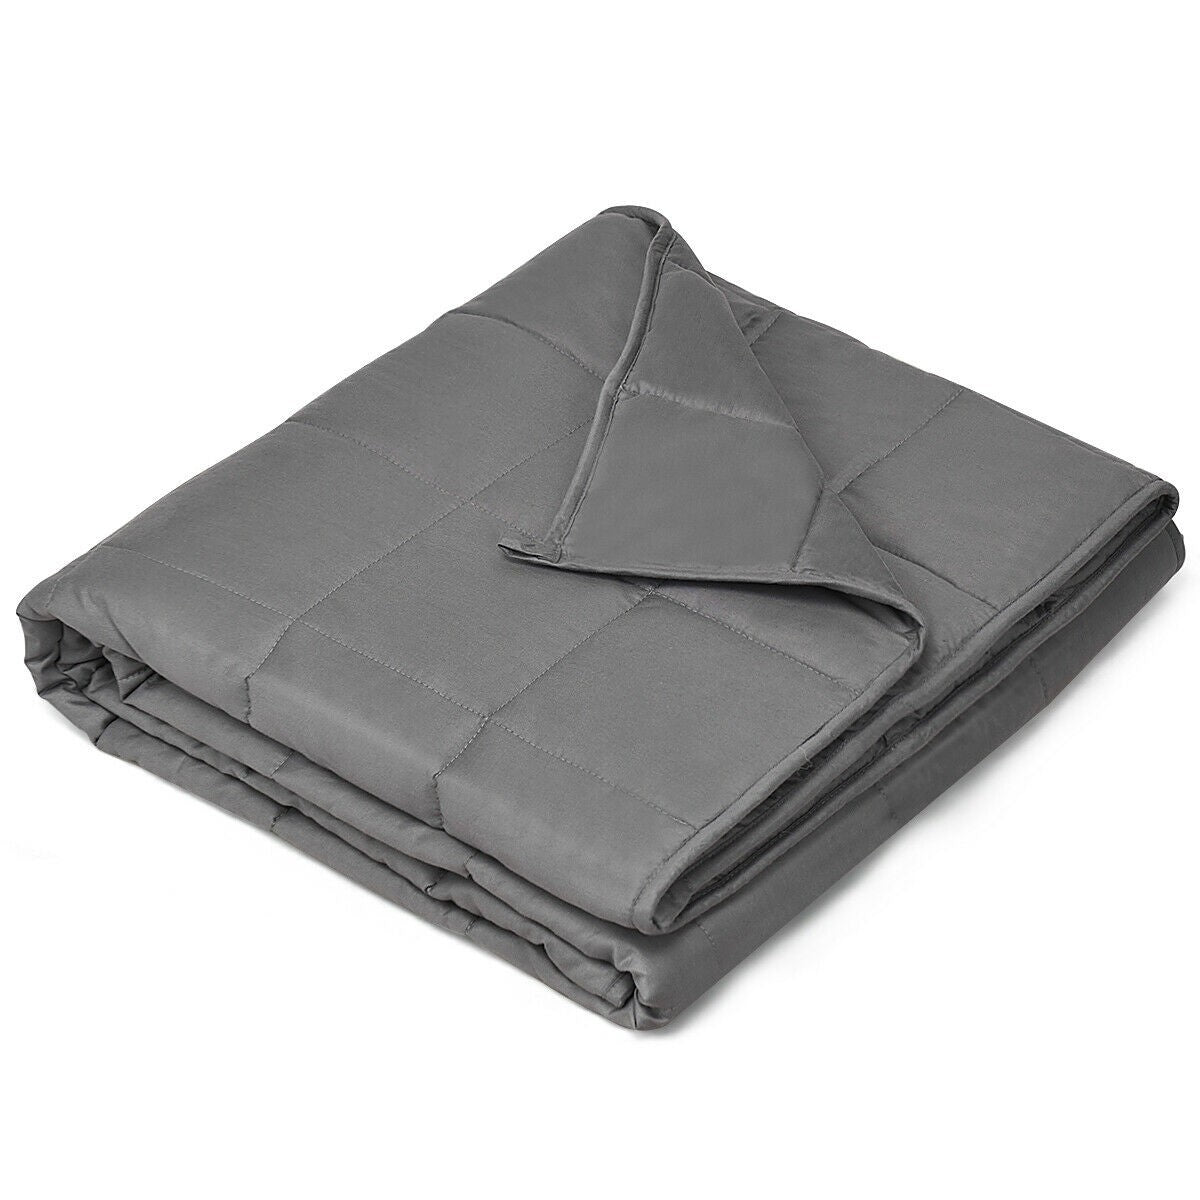 Premium Weighted Blanket Smaller Pockets 7lbs | 41"x60"